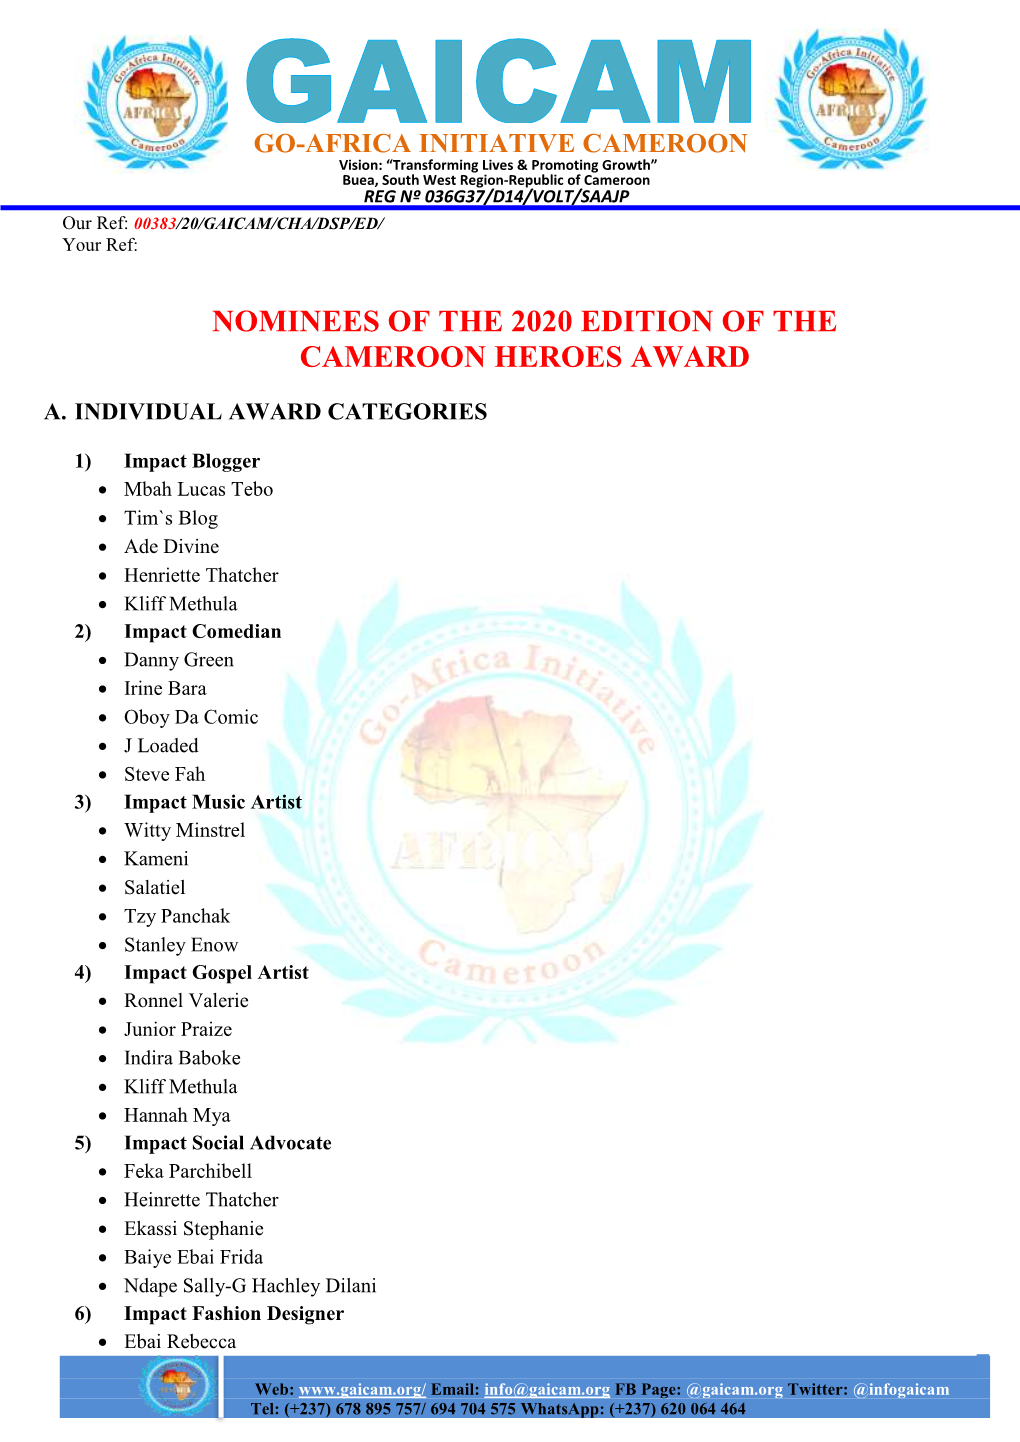 Nominees of the 2020 Edition of the Cameroon Heroes Award